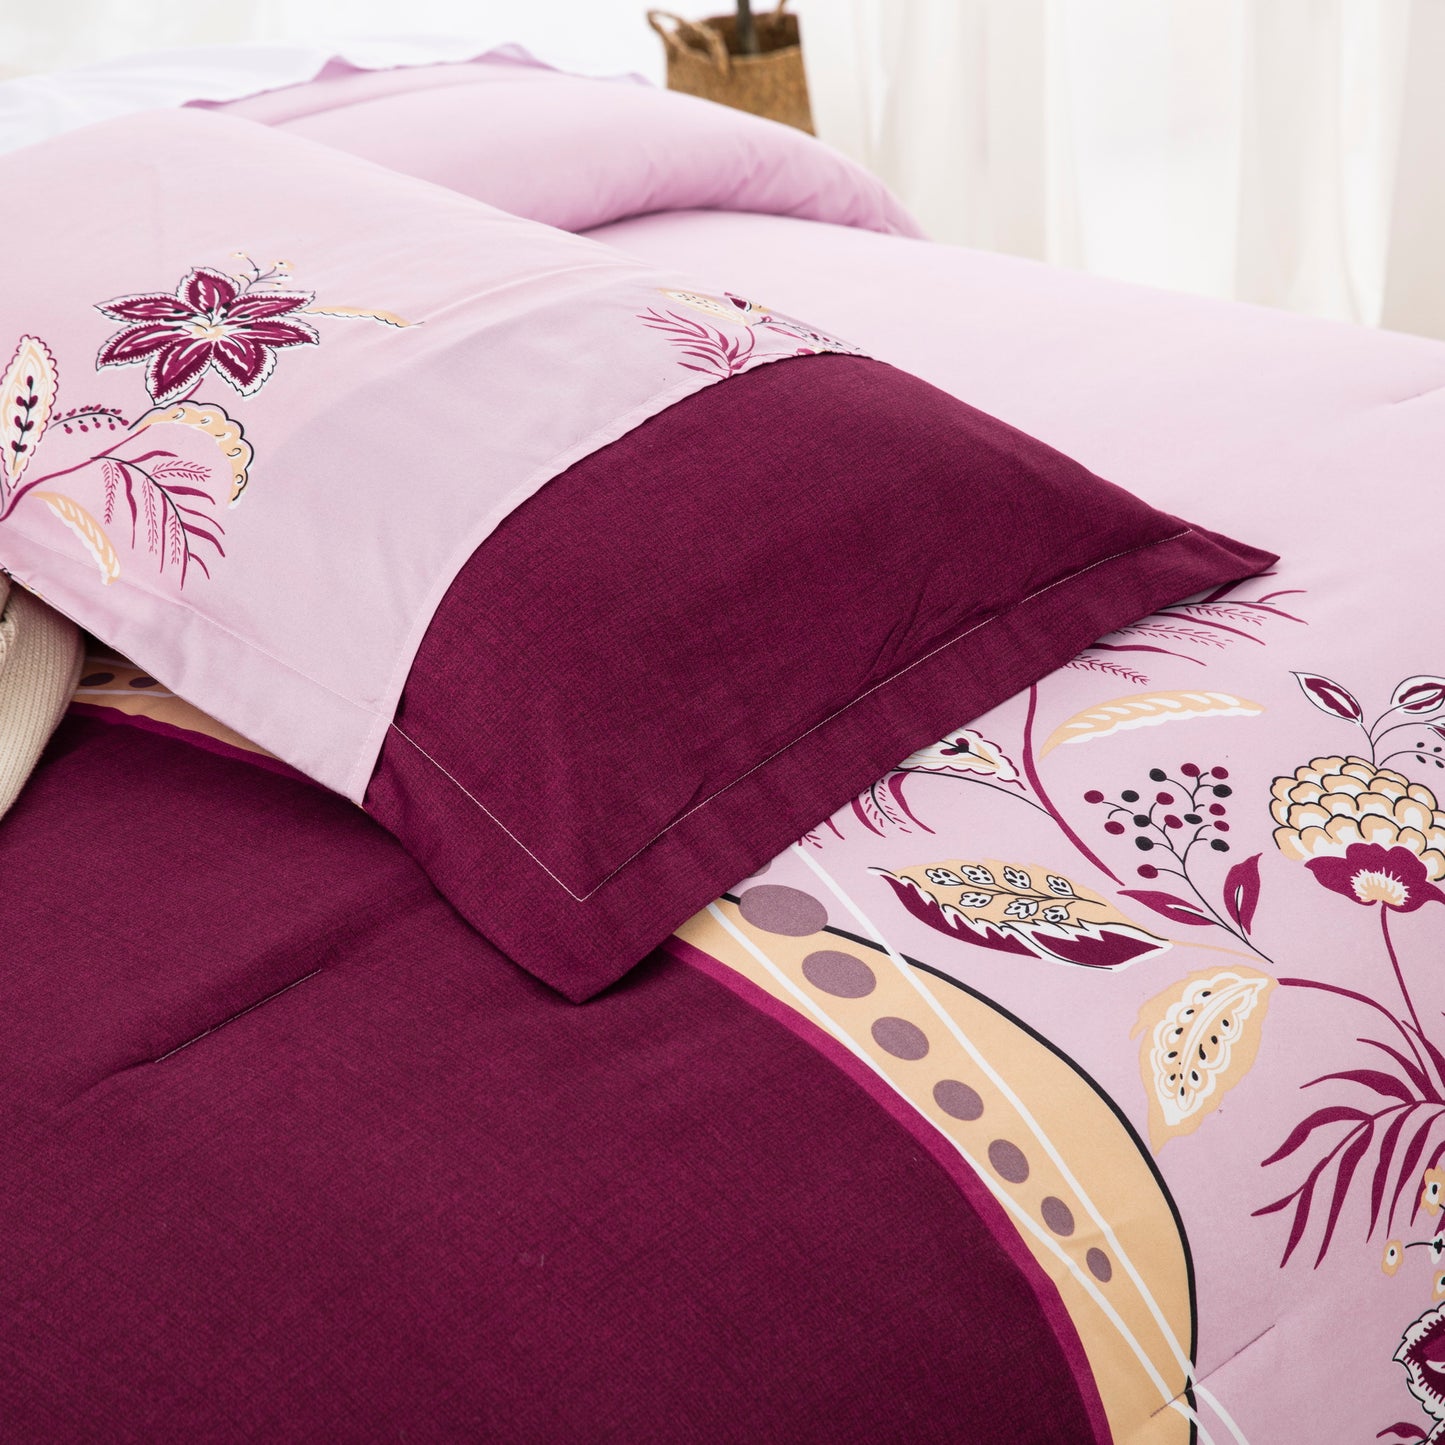 WONGS BEDDING Flower Comforter Set with 2 Pillow Cases